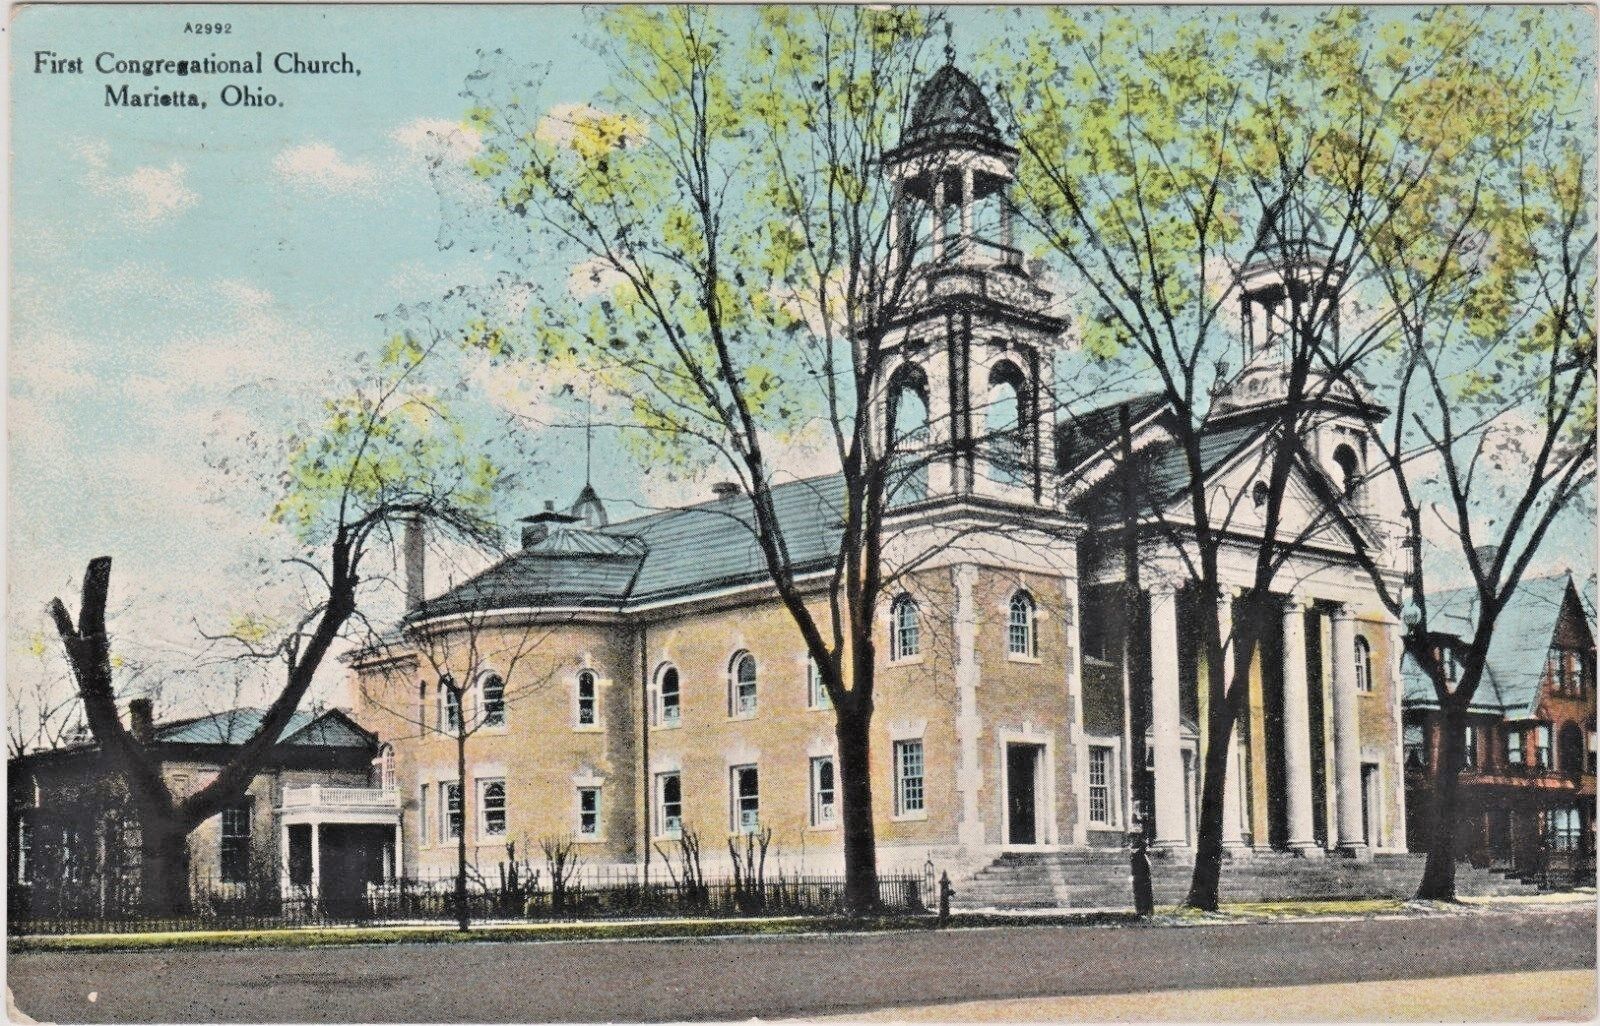 First Congregational Church at 399 Front Street in Marietta, Ohio in Early 1900s